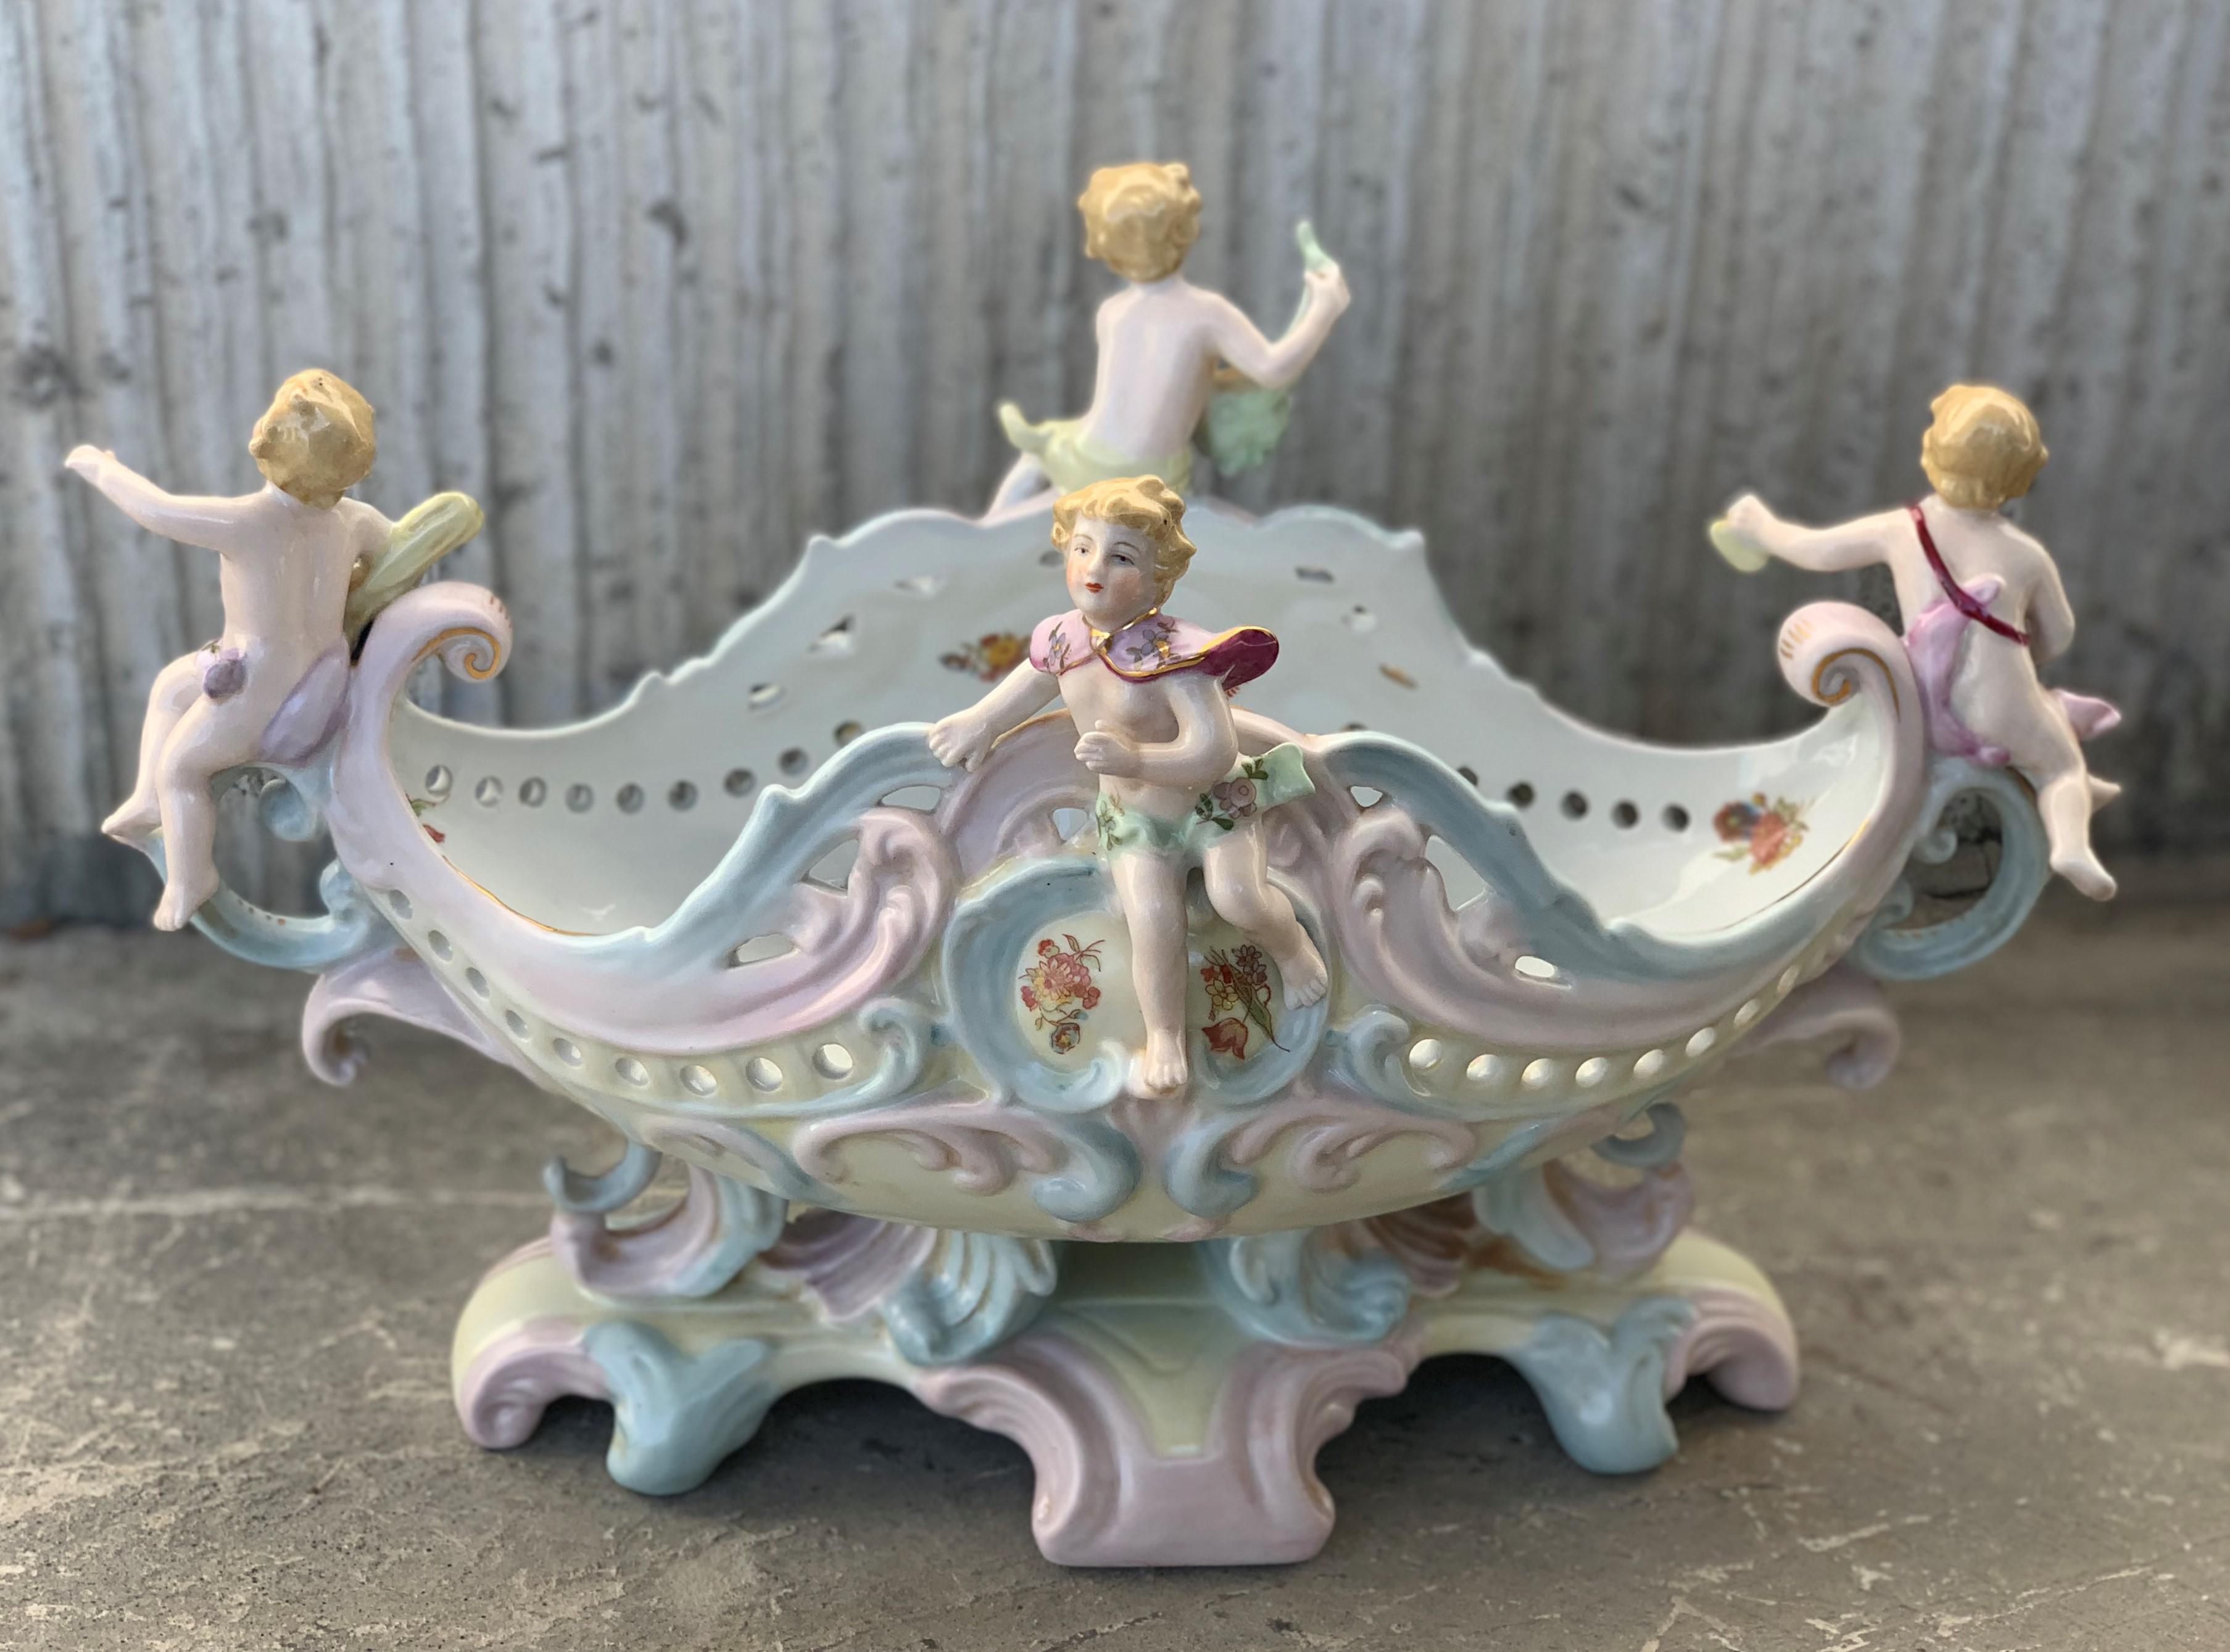 19th century Austrian porcelain centerpiece bowl or jardinière beautifully enameled in rich colors with floral sprays and gilt highlights. This stunning Rococo piece heavily Meissen piece also features encrusted flowers, leaves and ribbon with four